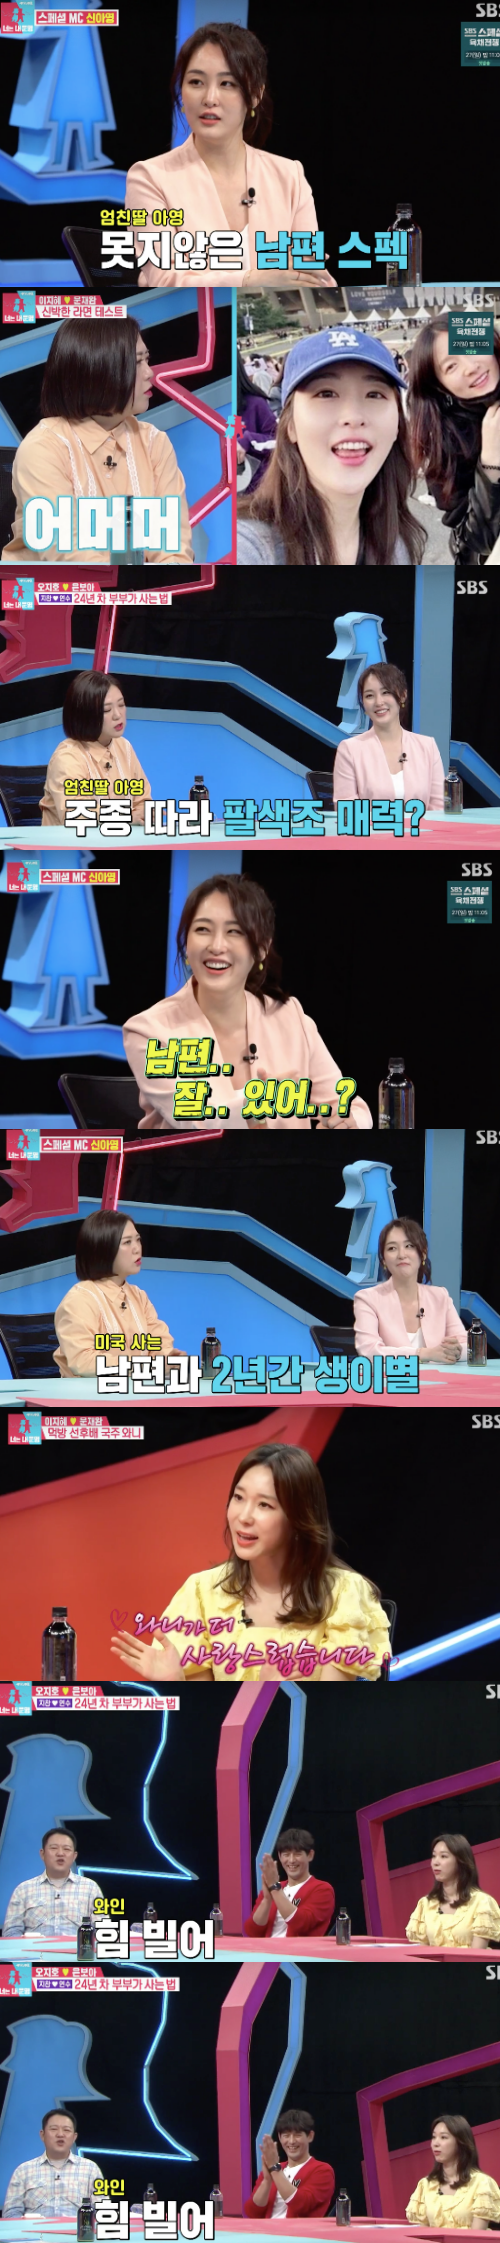 =In Sangsangmong 2, Shin Ah-yeong is the one who eats (?), and showed off her exitless charm from the food cost flex to The Red Car Stephanie Herseth Sandlin (?) flex for Husband.Shin Ah-yeong appeared in SBS entertainment Sangsangmong Season 2 - You Are My Destiny broadcast on the 21st.Shin Ah-yeong, a former announcer who is famous for Harvard Business School goddess and original Mother Father daughter, appeared as a special MC.MCs said, The couple of empties born by Corona, and the US company mentioned an anecdote that separated Husband for two years, and said it was the 14th year of the previous year.Shin Ah-yeong said, I have been in love for half of the 14 years I have been together for seven years. Lee Ji-hye said, I did not see it for two or three years in the middle. Lee Ji-hye said, Then I can meet New Fe, but it is different from me.Shin Ah-yeong, who told me that he had finally joined the end of his life, said, I am like a honeymoon again because I have been married for four years, I have been married for three months. He asked Husband, who was covered in the veil, I am really worried and worried about my surroundings. ...Mother father daughter Shin Ah-yeong said Husbands specifications were as great as they were.Shin Ah-yeong said, I used to work in the financial industry and now I have moved to venture capitalist, Shin Ah-yeong said of Husband, an alumni of Harvard Business School.However, when asked, What do you mean when you want to live away again in three months? Shin Ah-yeong acknowledged that I feel a real statue when I live together, and I am angry with a small thing. Especially when I work in a house, such as laundry, Husband takes off my clothes everywhere.Lee Ji-hye said, Then take a picture of the data. Gim Gu-ra said, It is Moon Jae-wan, what is it to do, if it is a chaebol? Lee Ji-hye said, Yes, I can make money, I came out during the pregnancy to make money.Shin Ah-yeong also said that Lee Yeong-ae and BTS were connected, saying, I went to the concert together, my close sister was close to Lee Yeong-ae sister, and three went to BTS concert.When Lee Yeong-ae asked if he actually liked BTS, Shin Ah-yeong laughed, saying, I really liked it, but I forgot that Jimin was used, and my sister told me that Jimin danced well because he was dancing.Shin Ah-yeong said, I like to eat, and the money I spend when I eat is not too bad. I eat five hamburgers alone, ramen is for appetizers, bibim noodle salads, and ramen noodles are not for 3 to 4 boils.Shin Ah-yeong, who also has a drinking time with Husband at home, said, If you drink wine, you will turn the glass in one hand, and you will buy The Red Car (Forx). But I can not remember, I can not give you that expensive tea.Gim Gu-ra said, It is a problem of the main generation.After 10 minutes of alarm-type contact, Husband and his contactless Husband asked Shin Ah-yeong, This is the latter without worrying, he said, I will see you at home. He showed a stronger love because he overcame 14 years of long-time.On the other hand, Shin Ah-yeong, who made his debut as SBS ESPN announcer in 2013, was recently selected as the exclusive model of the cosmetic brand Rolf New Biaom, and has been on the airwaves such as SBS Plus Dandangpo, TV Chosun Star Check, STATV Sook Hee Nee Beauty, MBC every1 Come on - Korea is the first?, Movie Wat Talk He was recognized for his smooth progressing skills by going between cables.In 2018, he marriages with the current Husband, an alumni of Harvard Business School, and signed a hundred years.Sangmong2 Capture